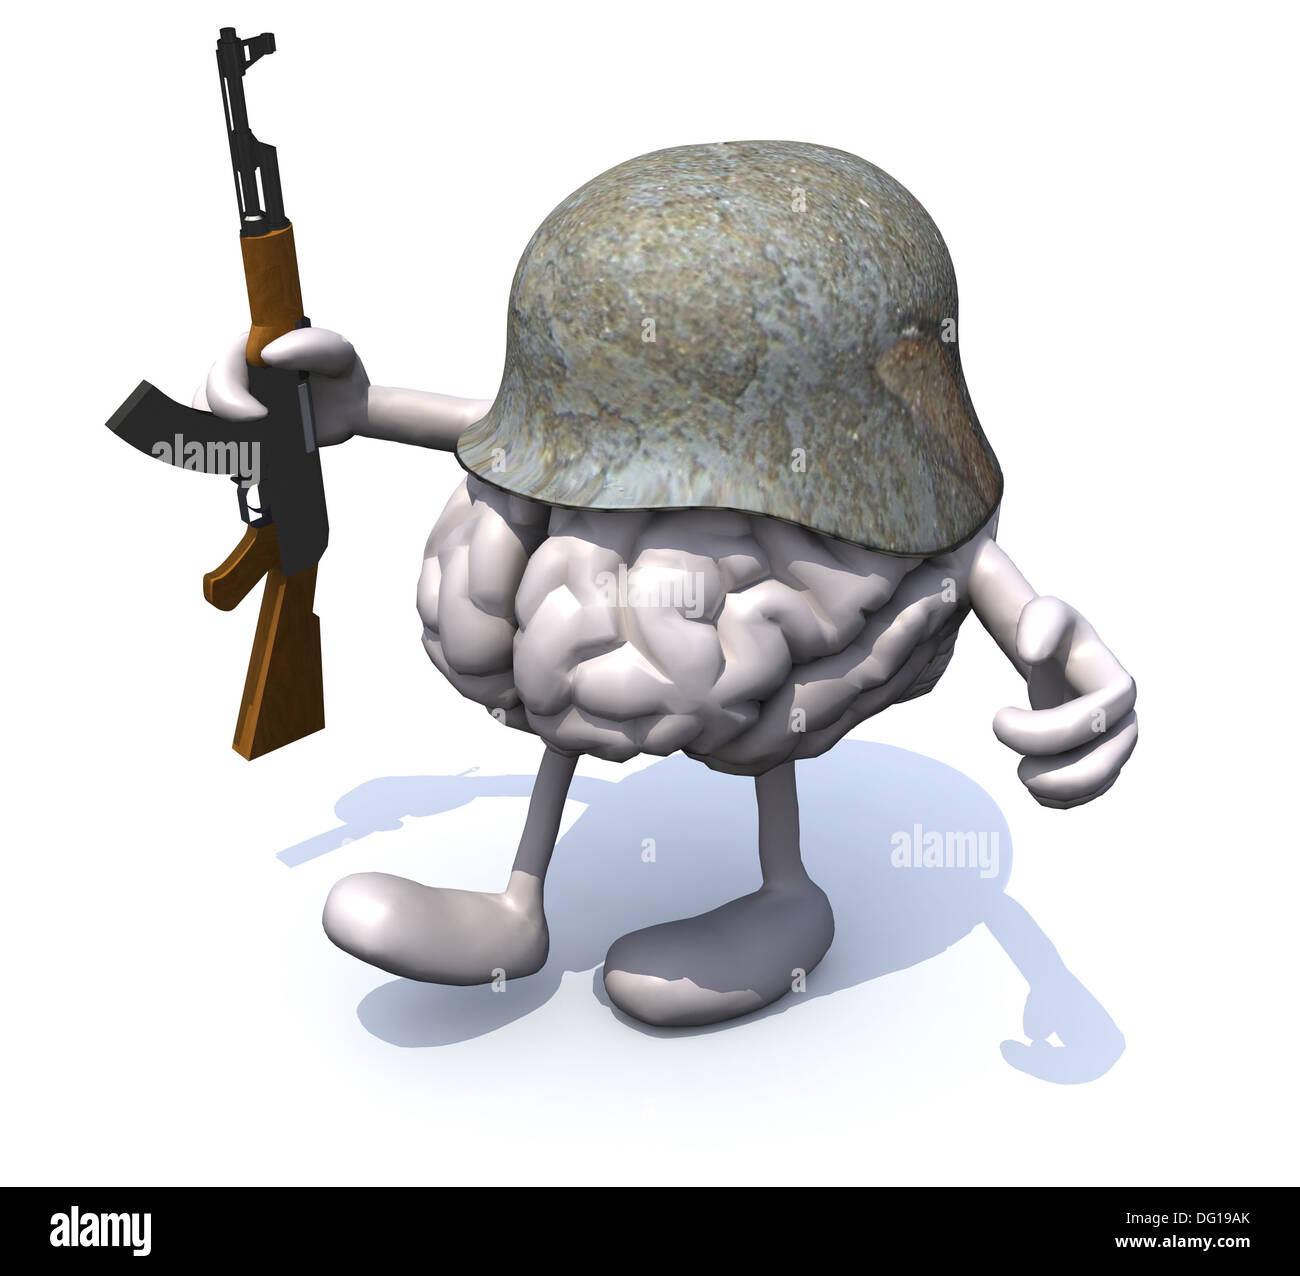 human brain with arms and legs, german helmet and rifle, 3d illustration Stock Photo